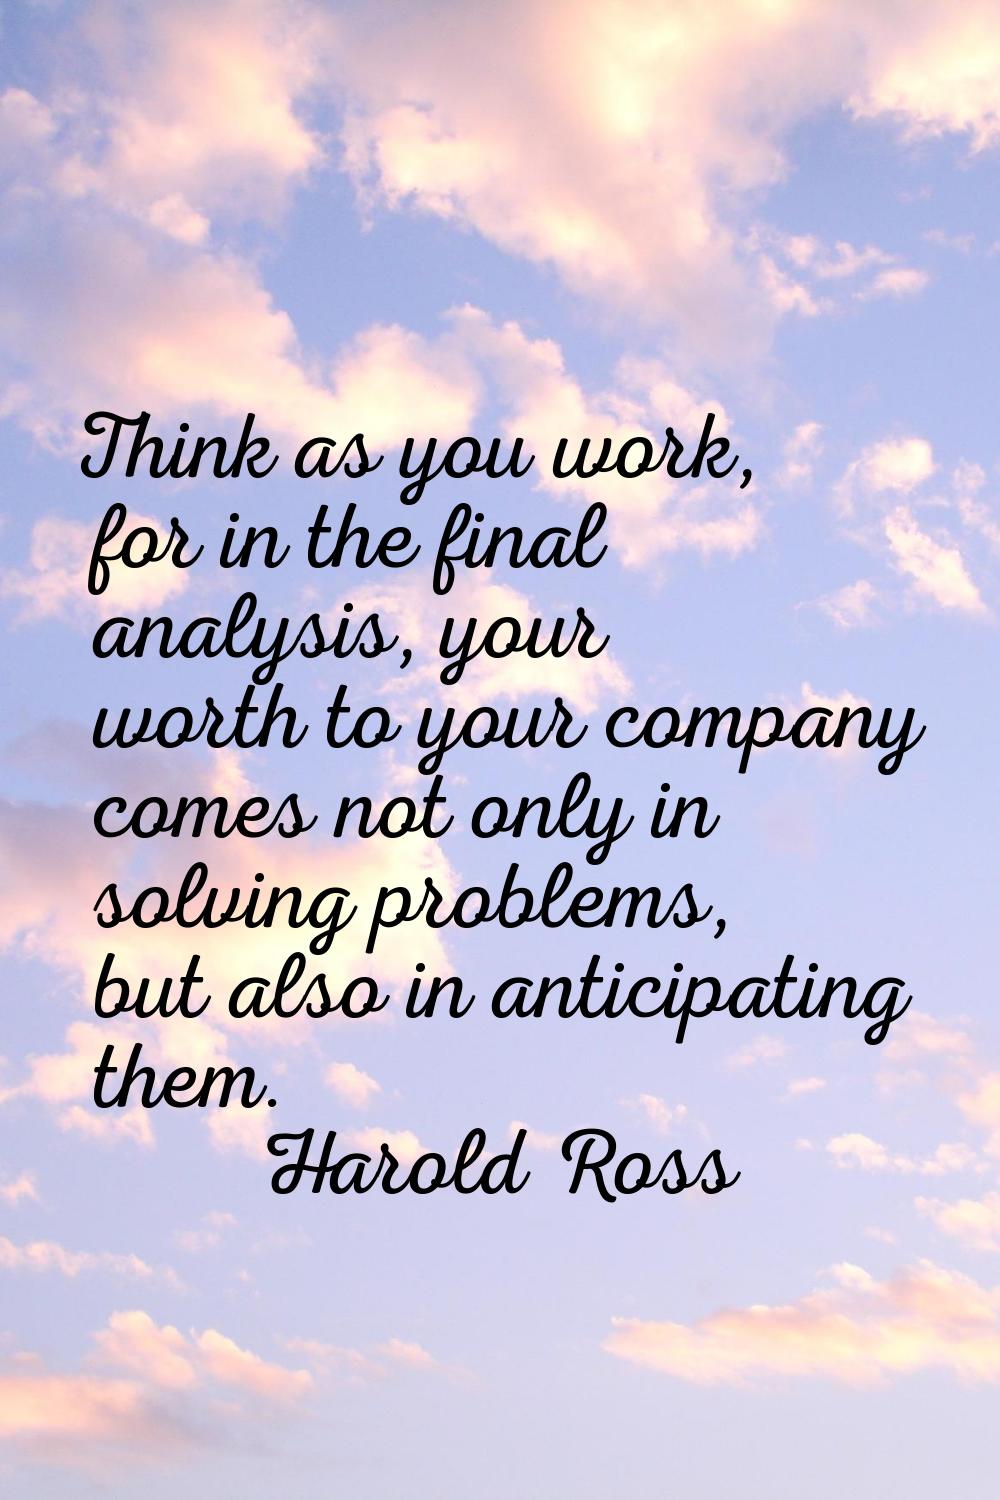 Think as you work, for in the final analysis, your worth to your company comes not only in solving 